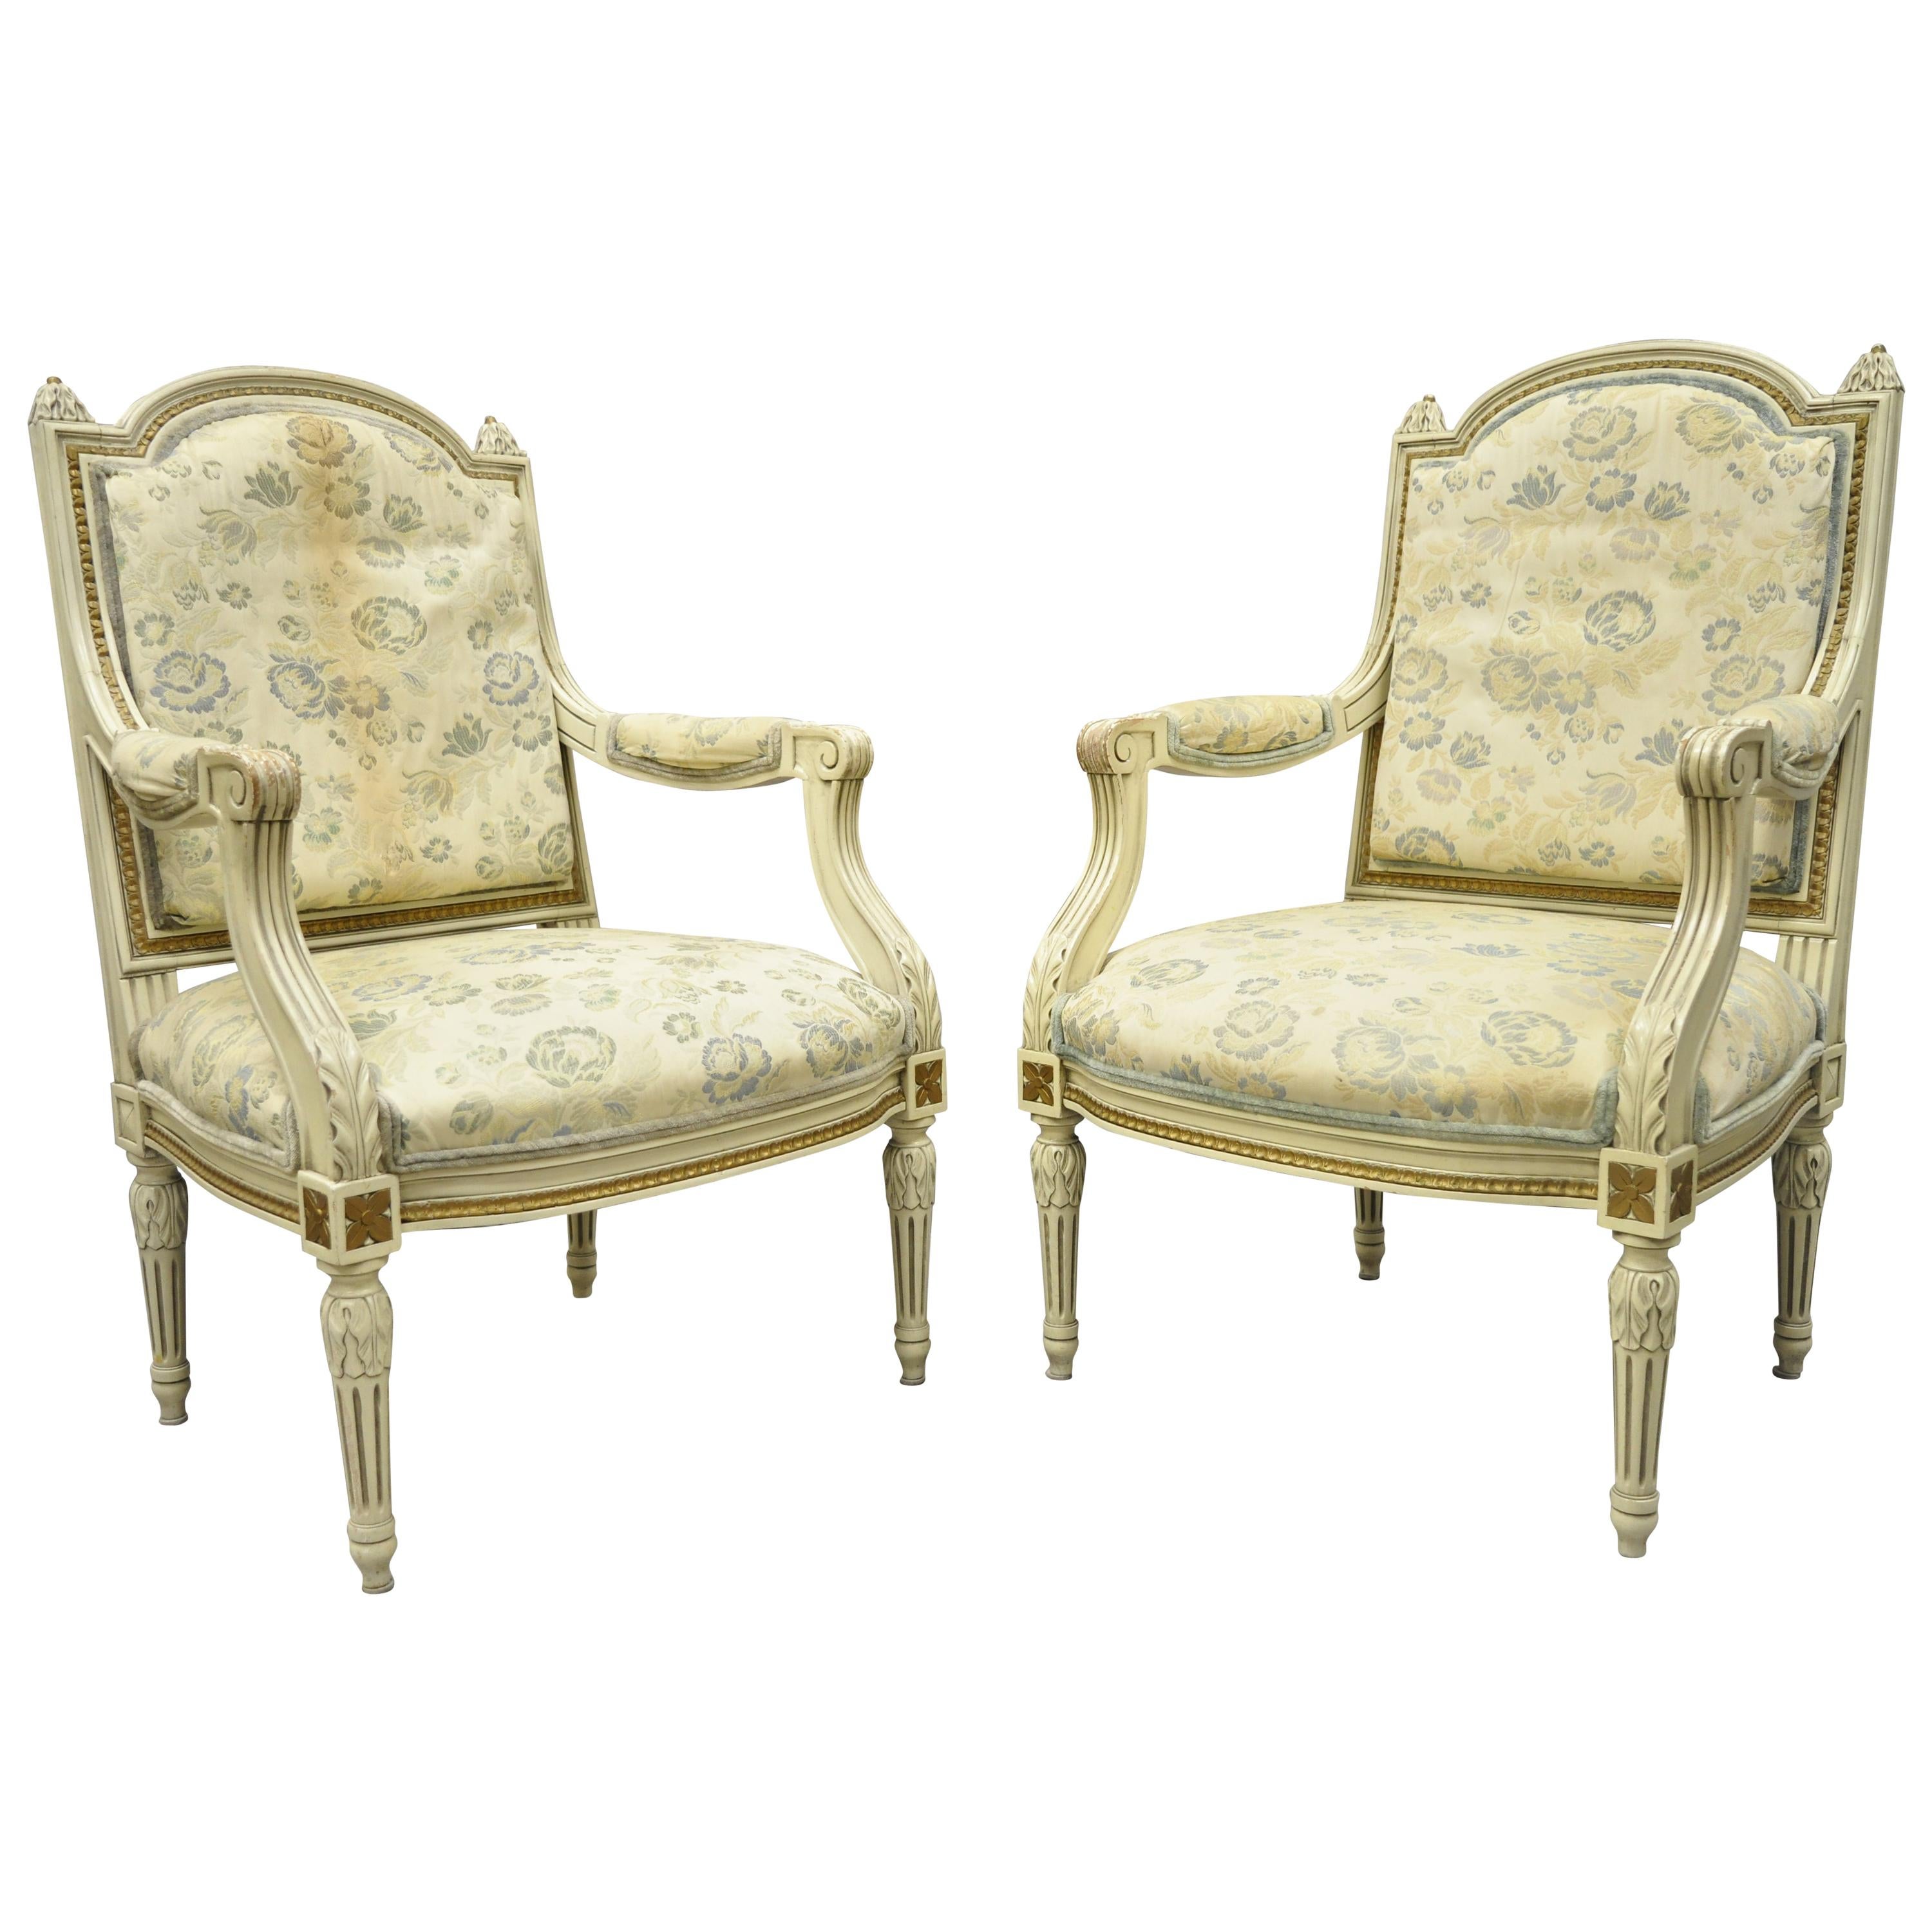 Vintage French Provincial Louis XVI Cream Painted Fauteuil Armchairs, a Pair For Sale